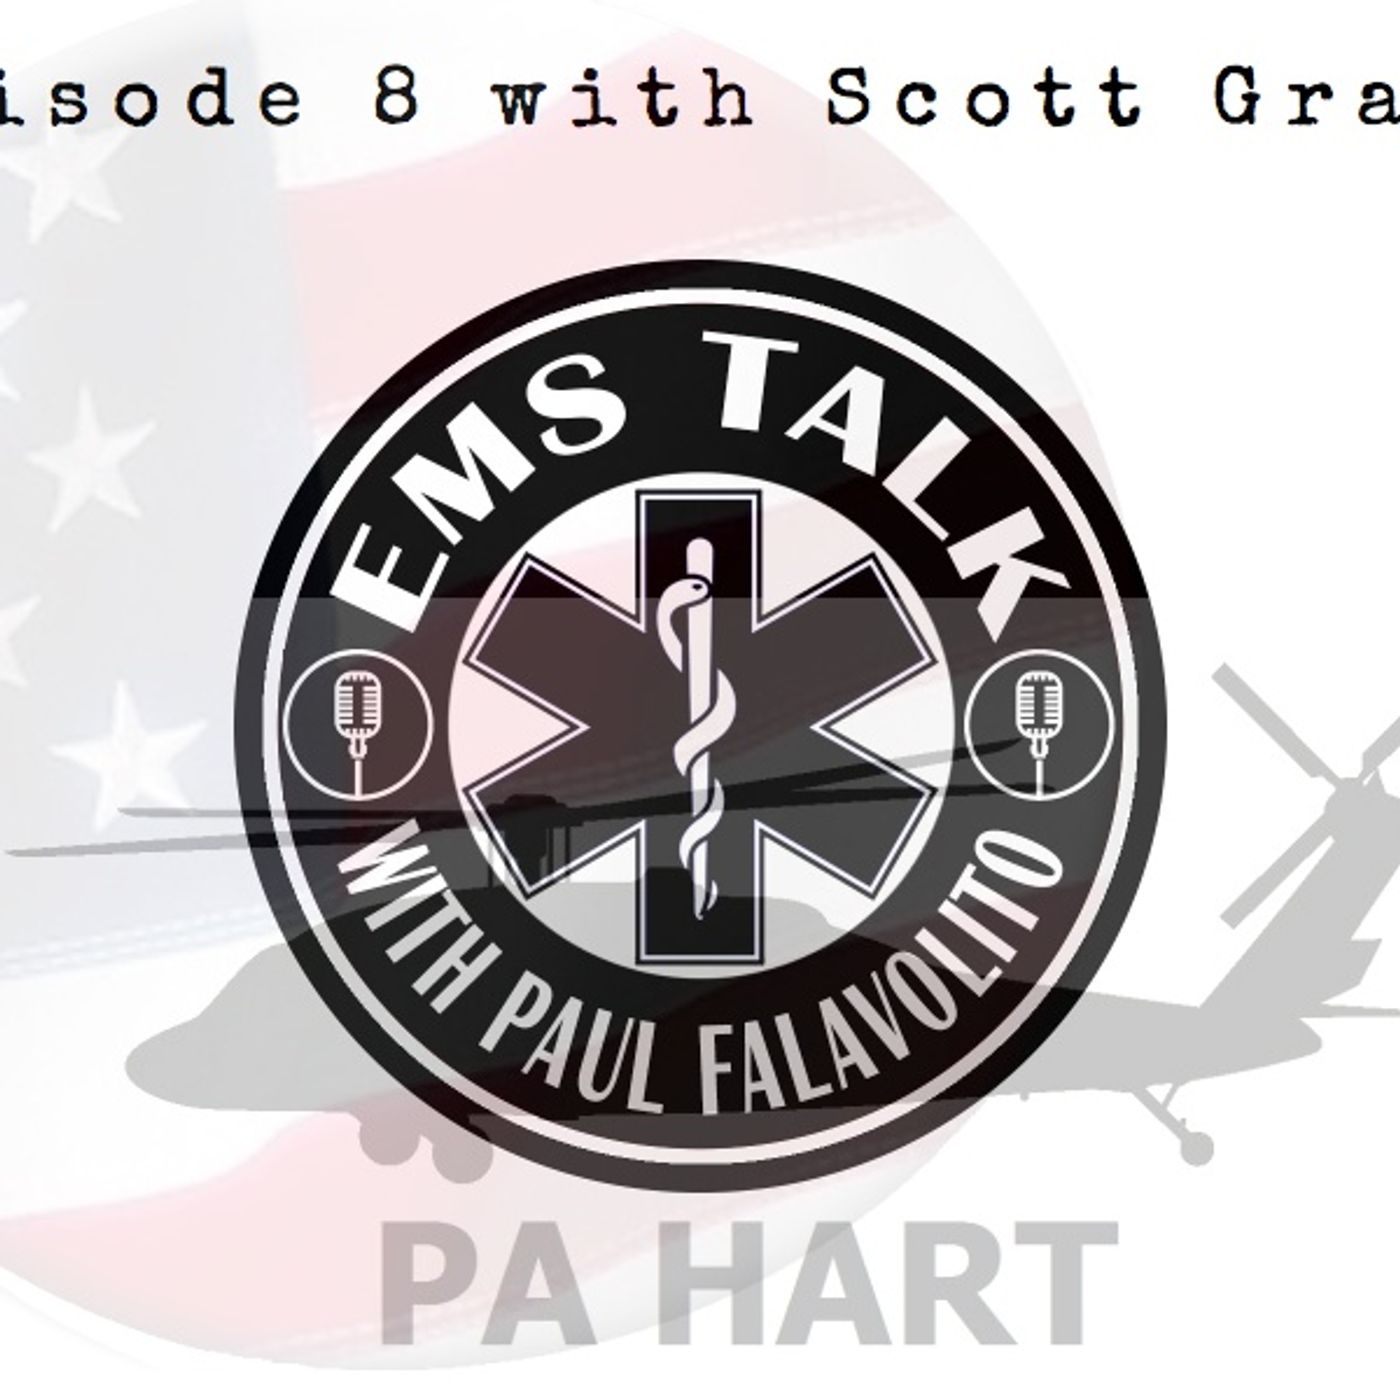 EMS Talk - Water Safety for First Responders - Episode 8